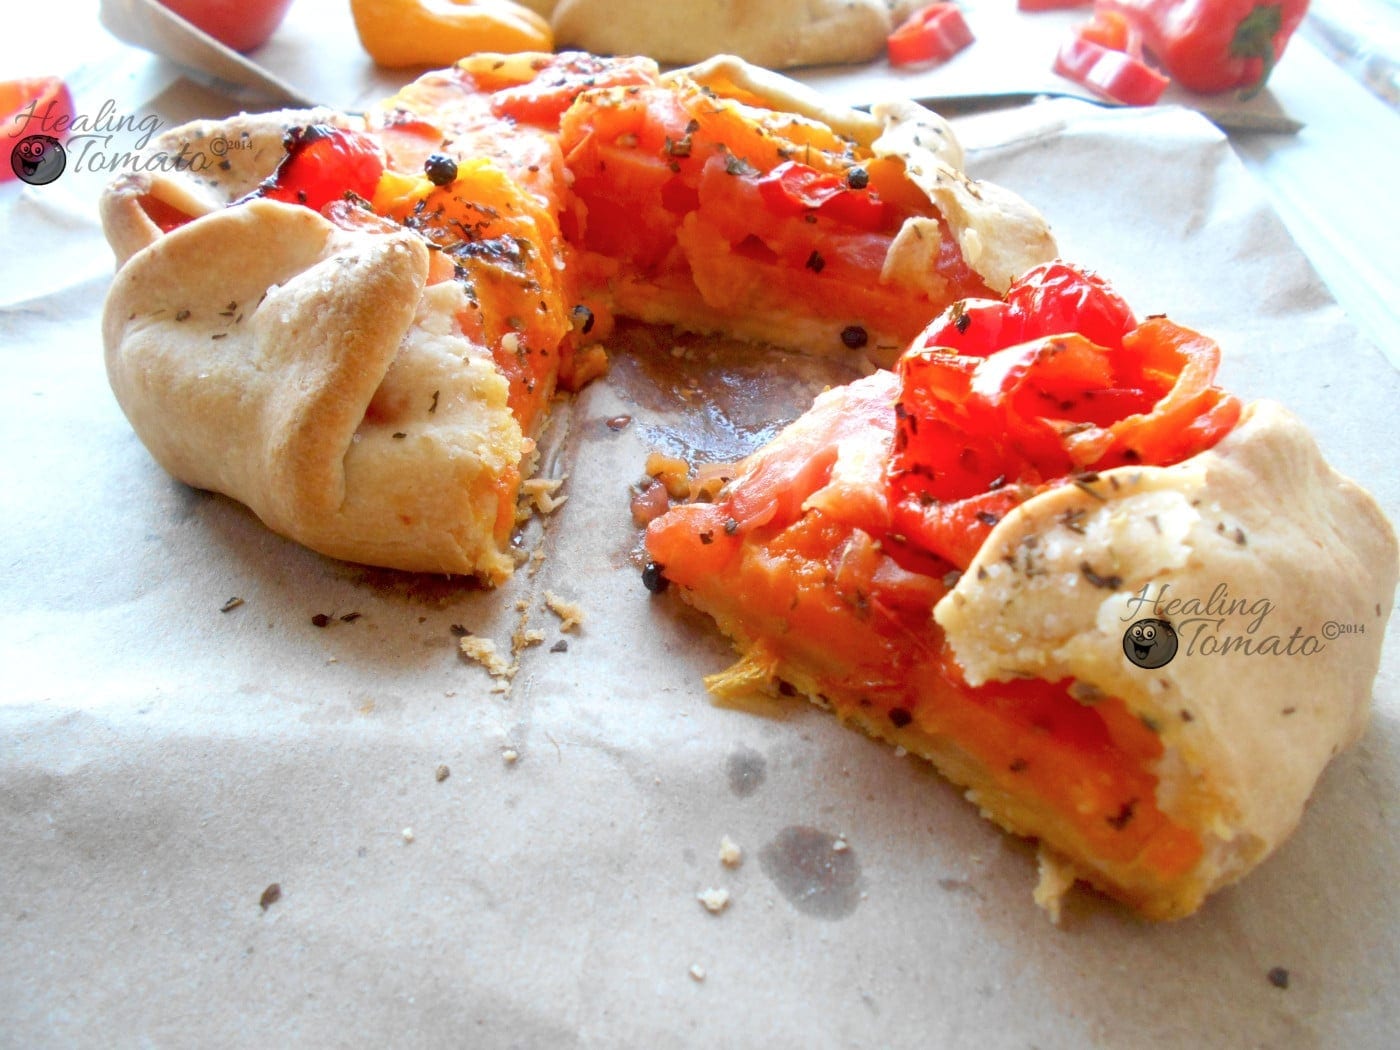 Front view of a slice of tomato galette